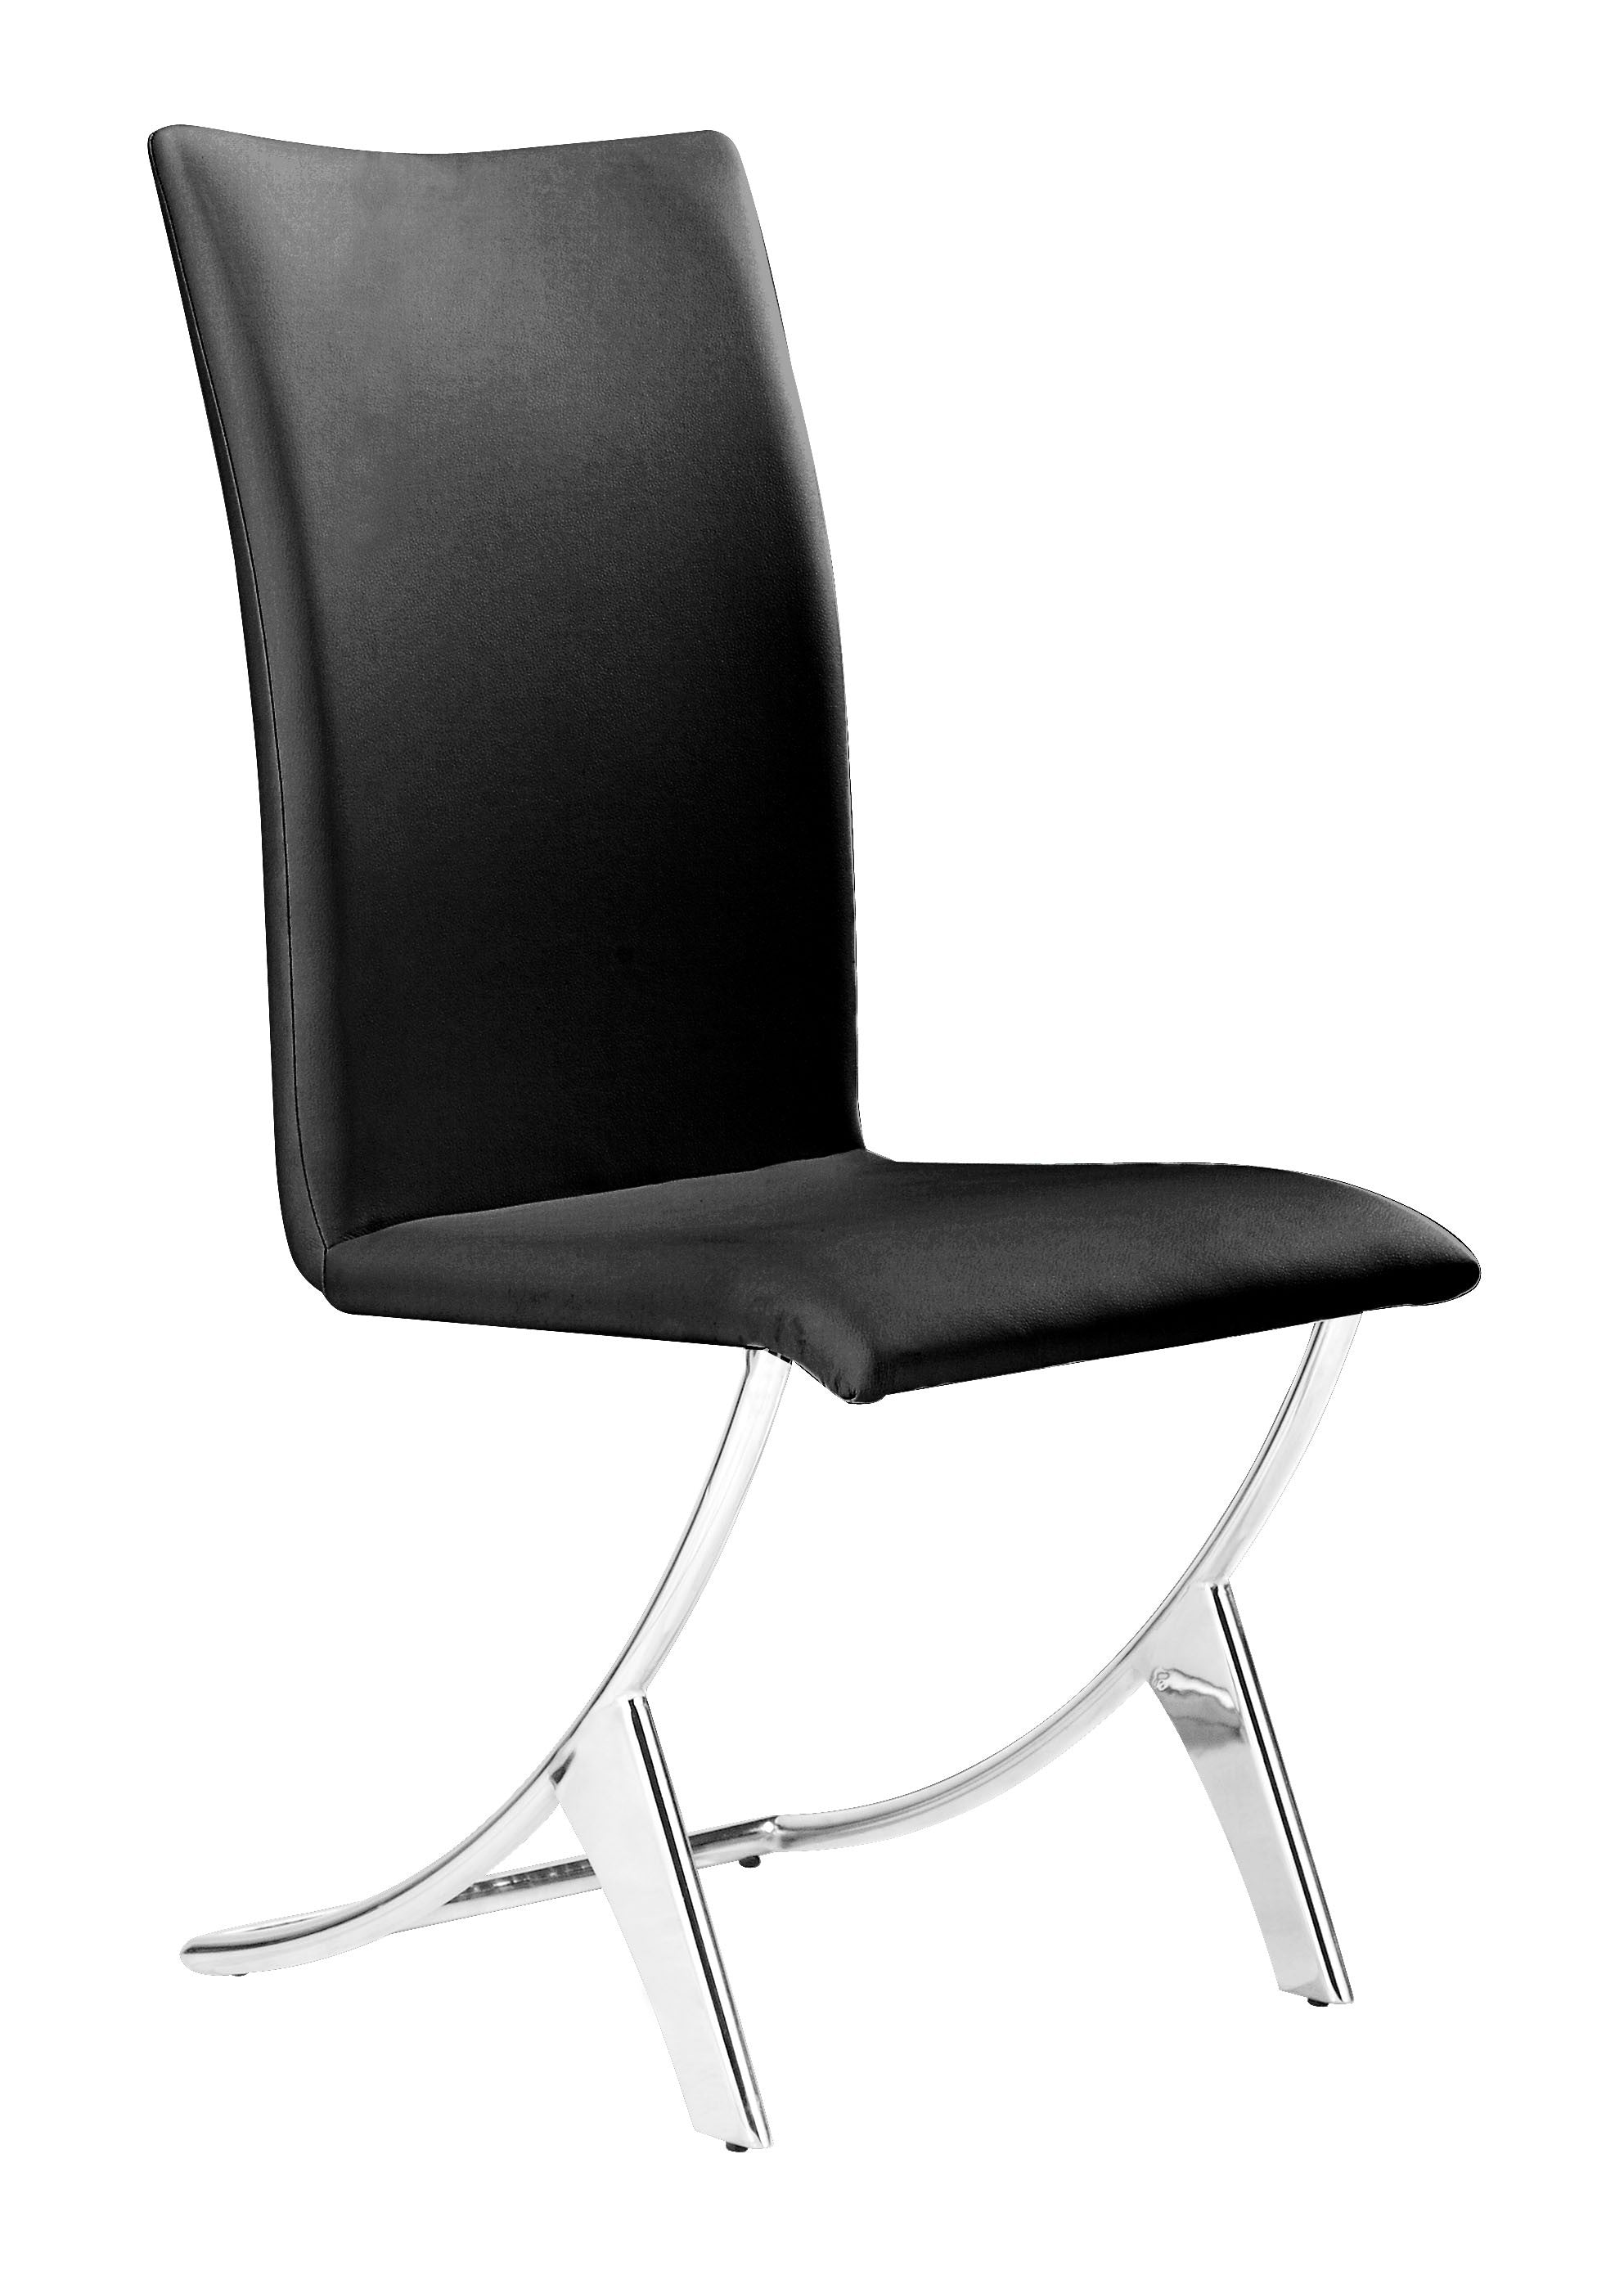 Set of Two Contempo Slim Black Faux Leather and Stainless Dining Chairs